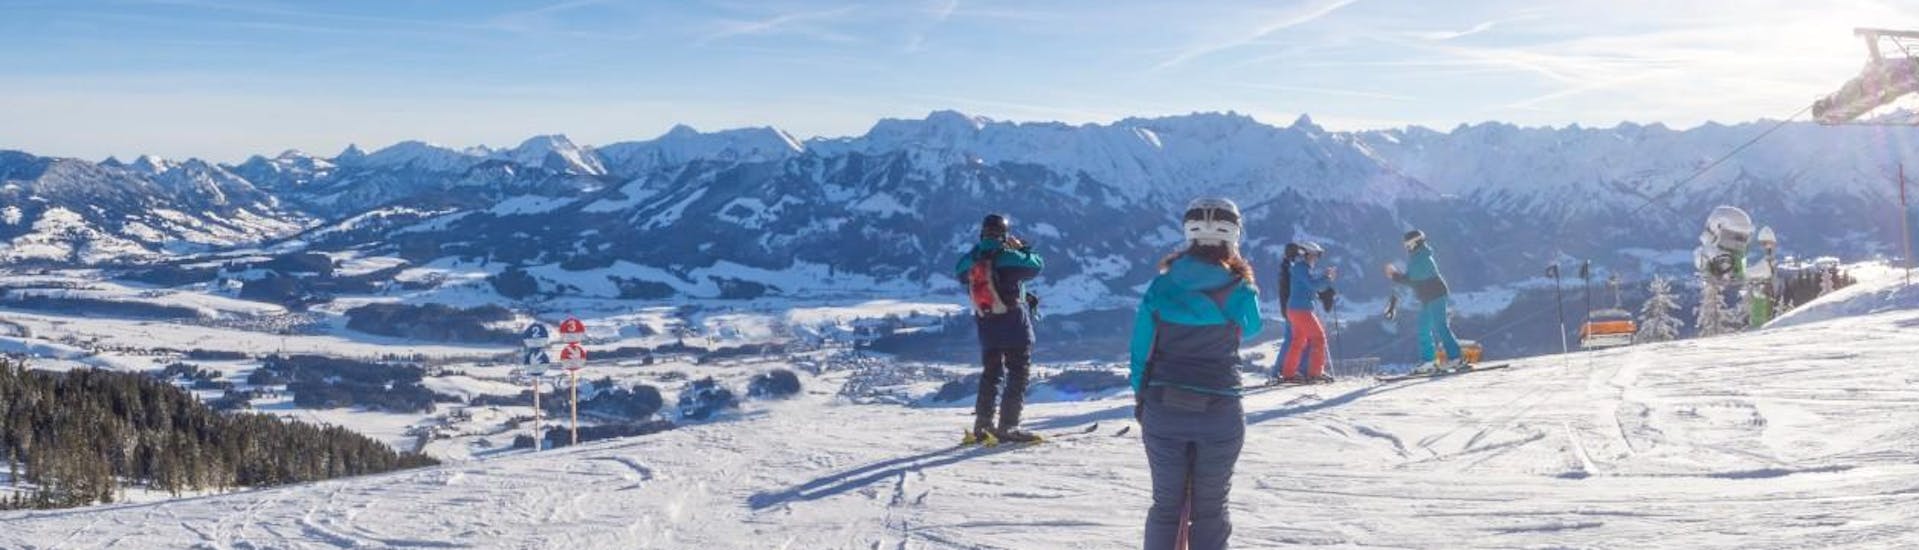 A group of people are at the top of the mountain looking out over the Bavarian ski resort of Bolsterlang, where local ski schools offer a ski lessons to visitors who want to learn to ski.